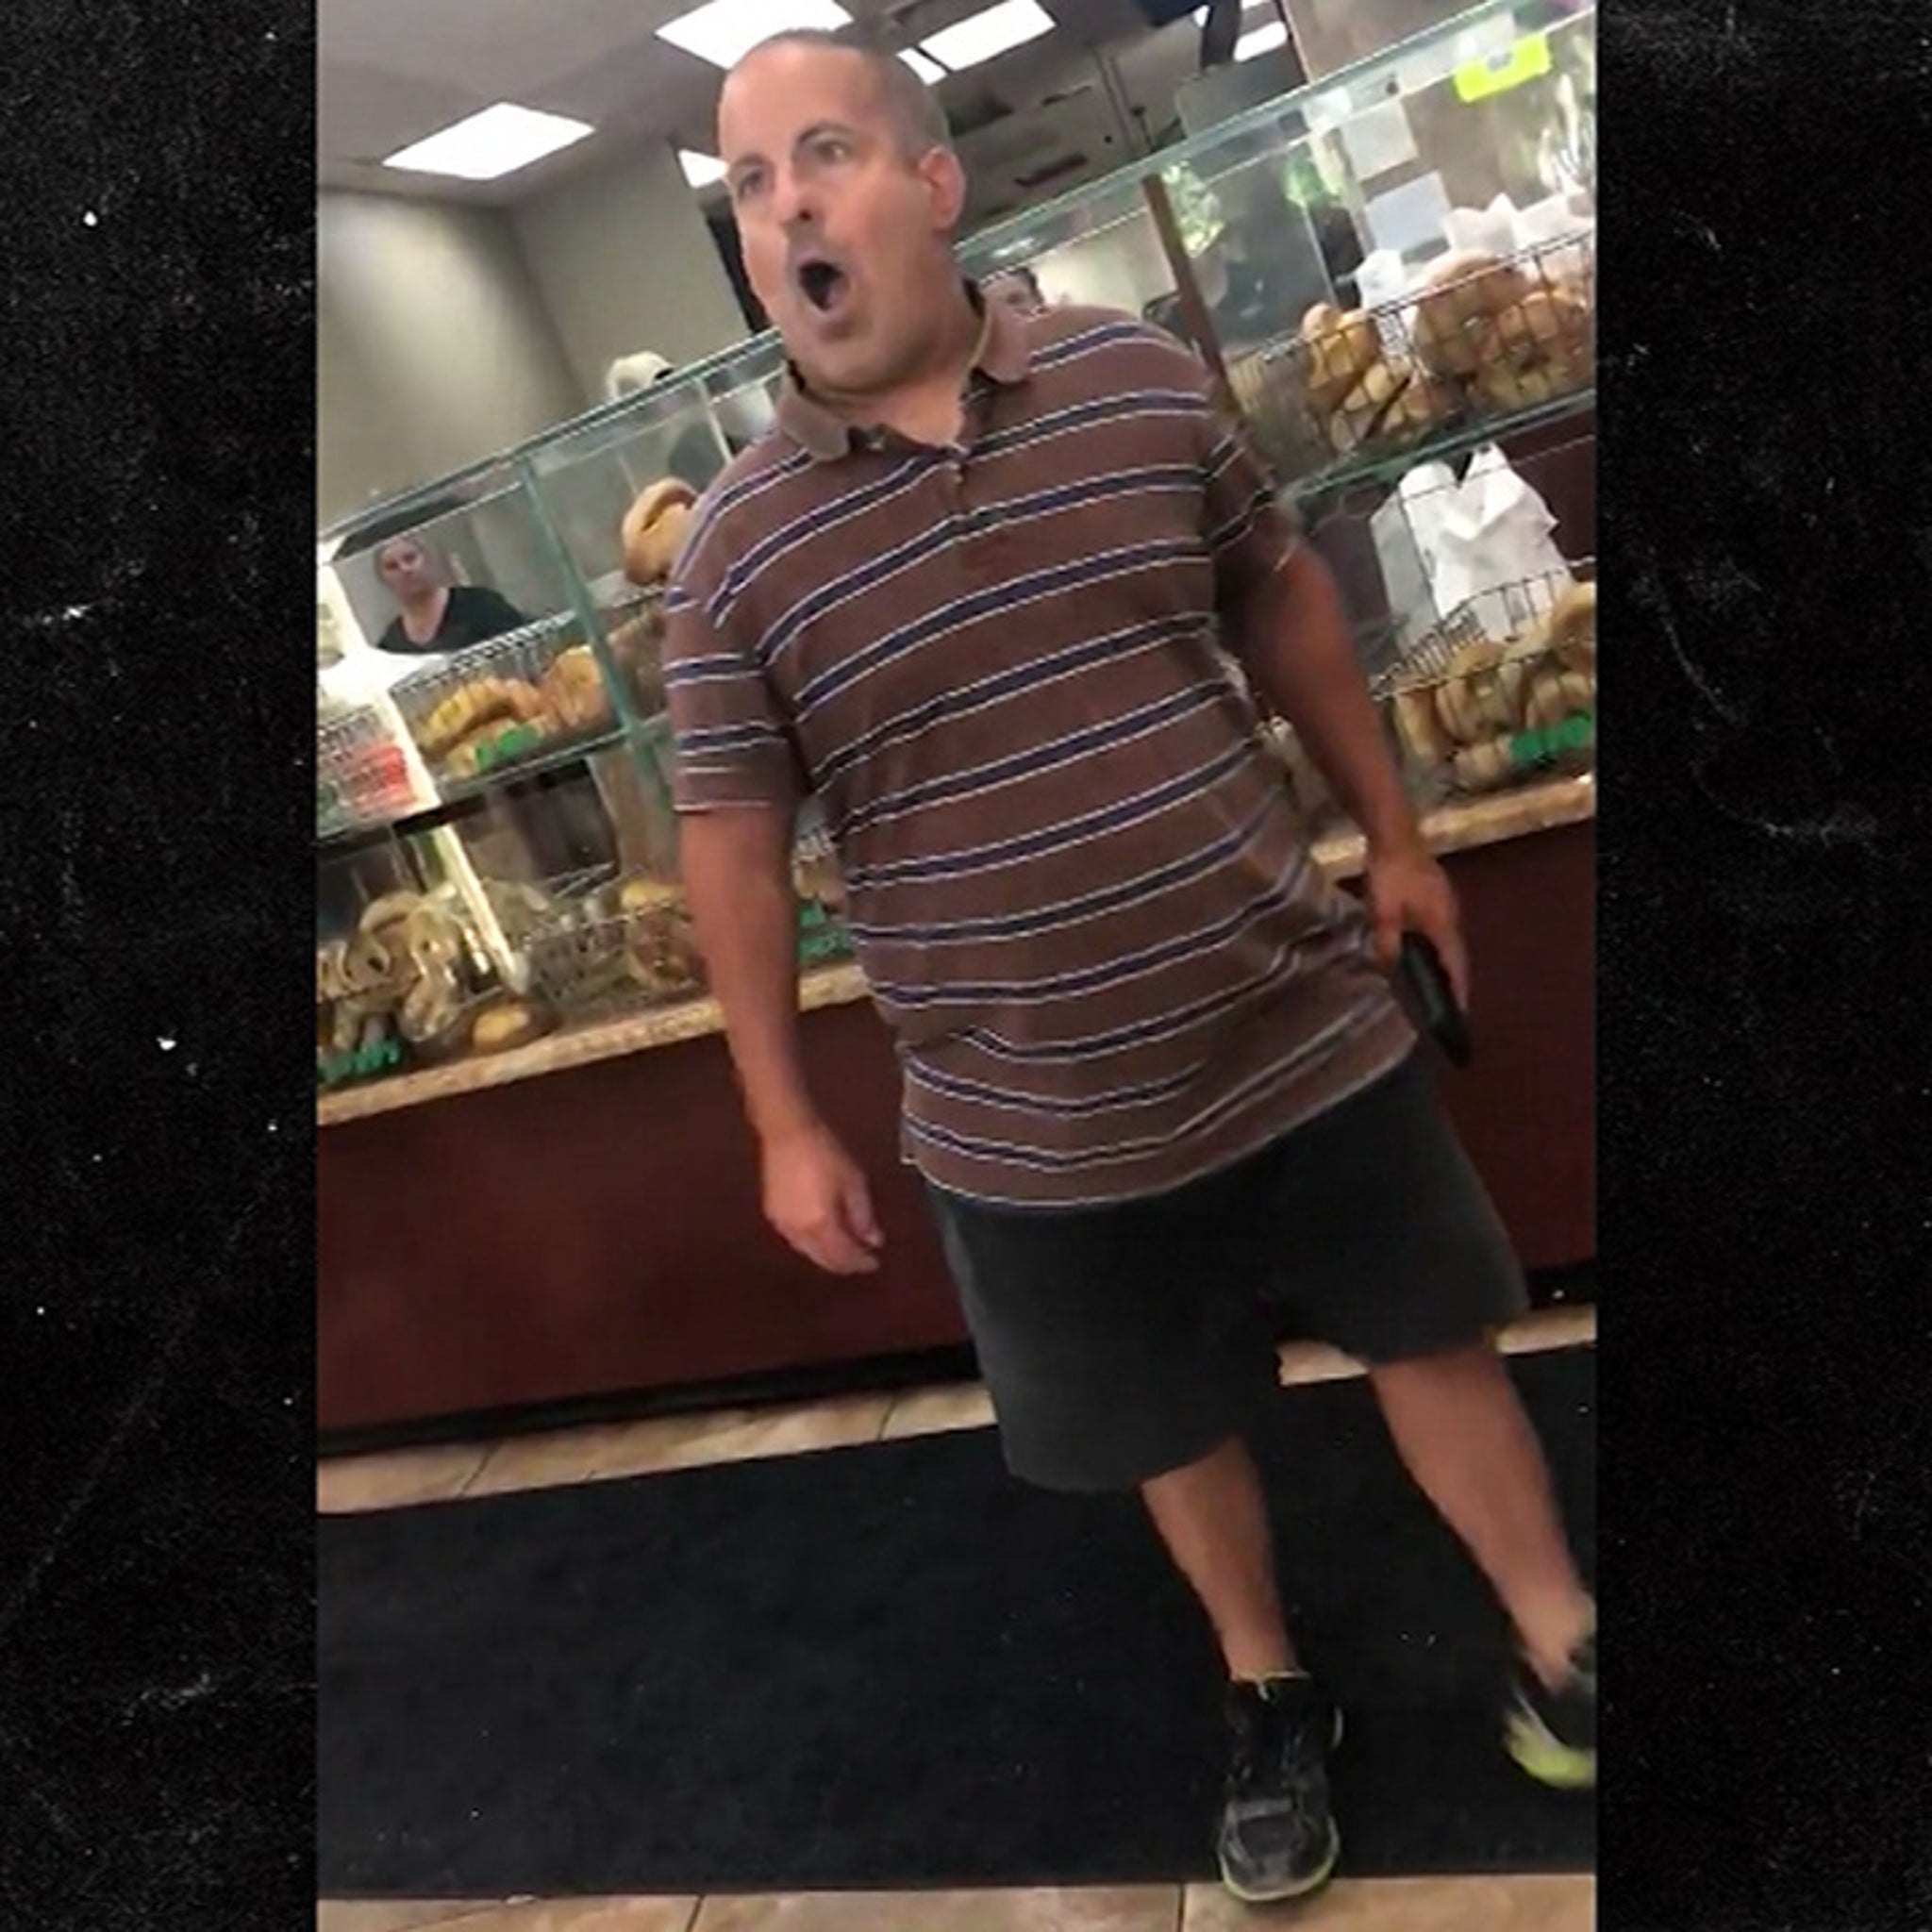 Angry Bagel Guy Has History of Loud Confrontations